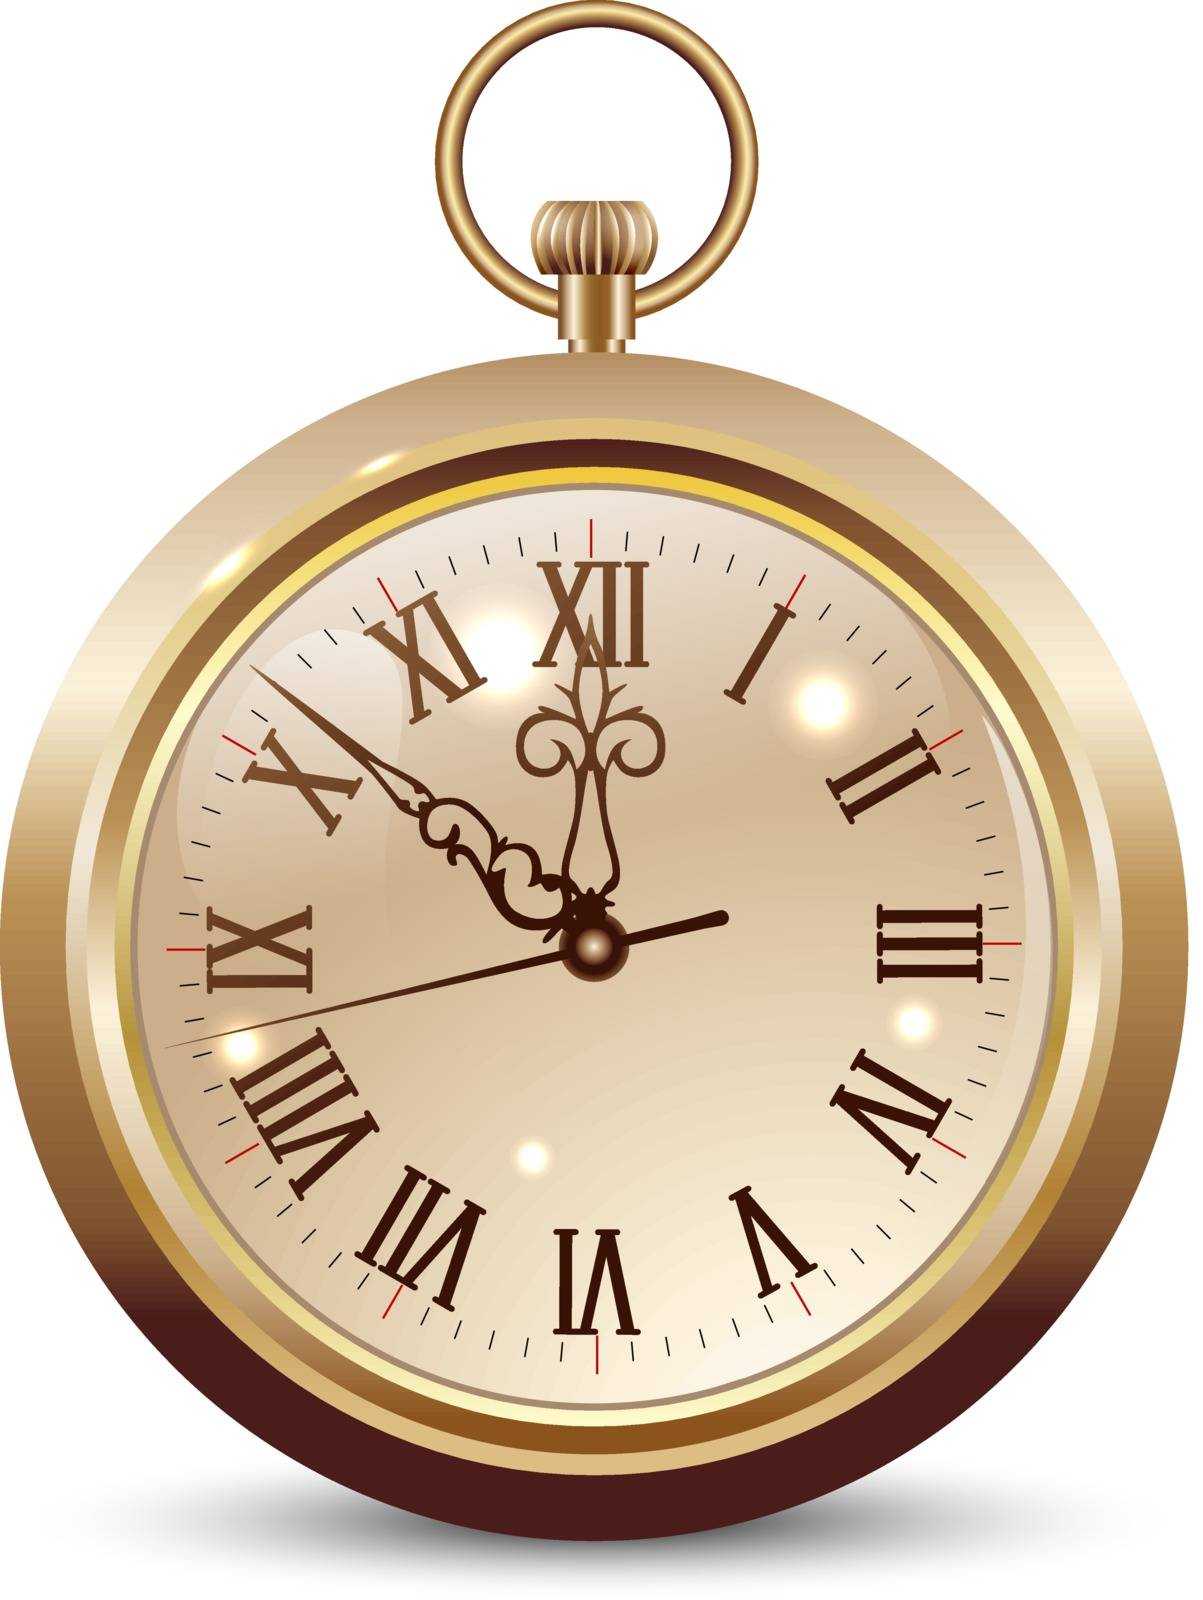 Pocket watch isolated on a white background. Design element. Pocket watch in gold color.